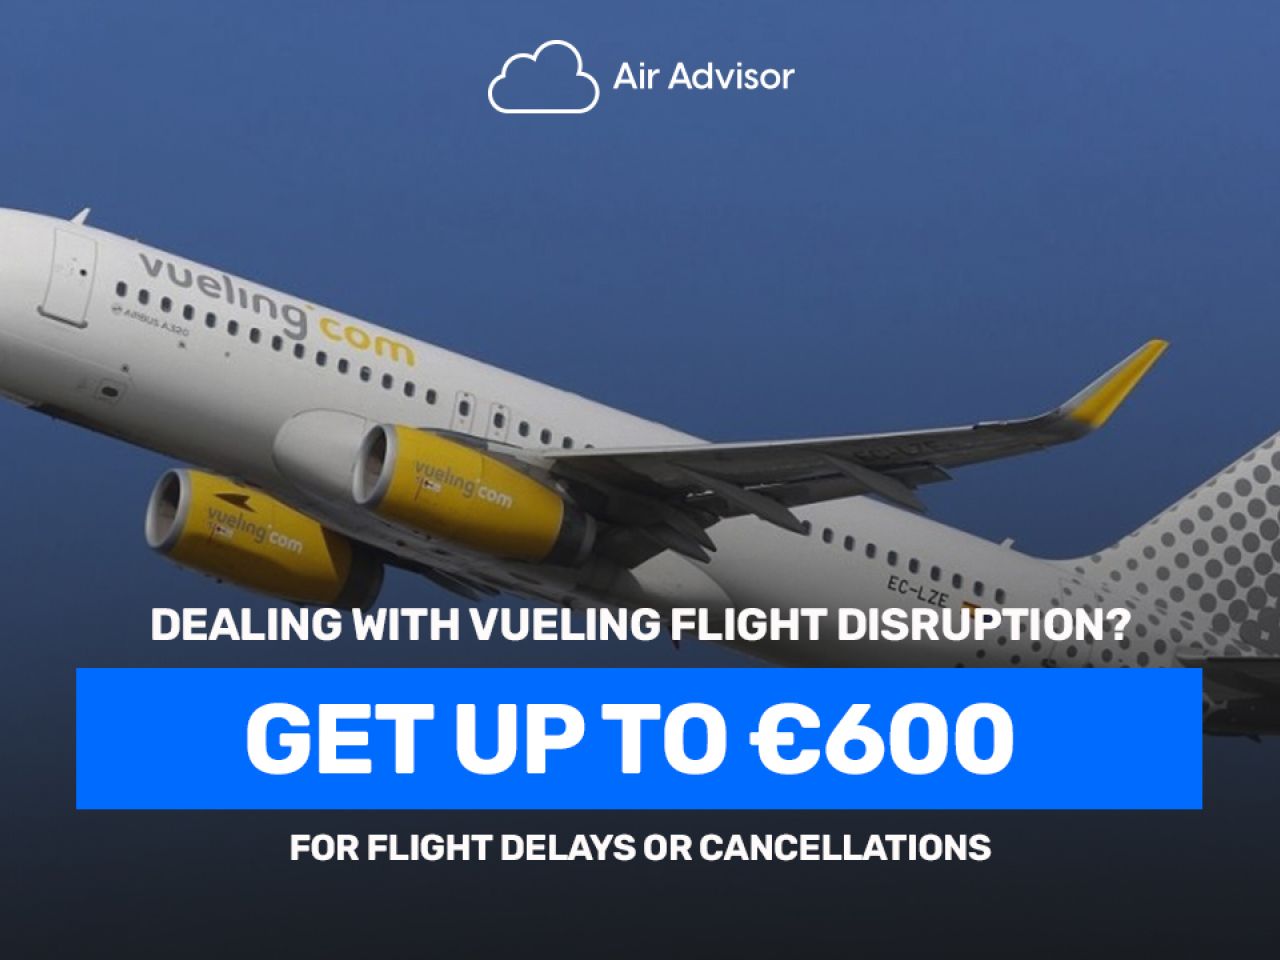 The Guardian: Vueling Refuses To Compensate Passengers More Than 50 EUR For Destroyed  Suitcase Repair – But Can They Really? - LoyaltyLobby